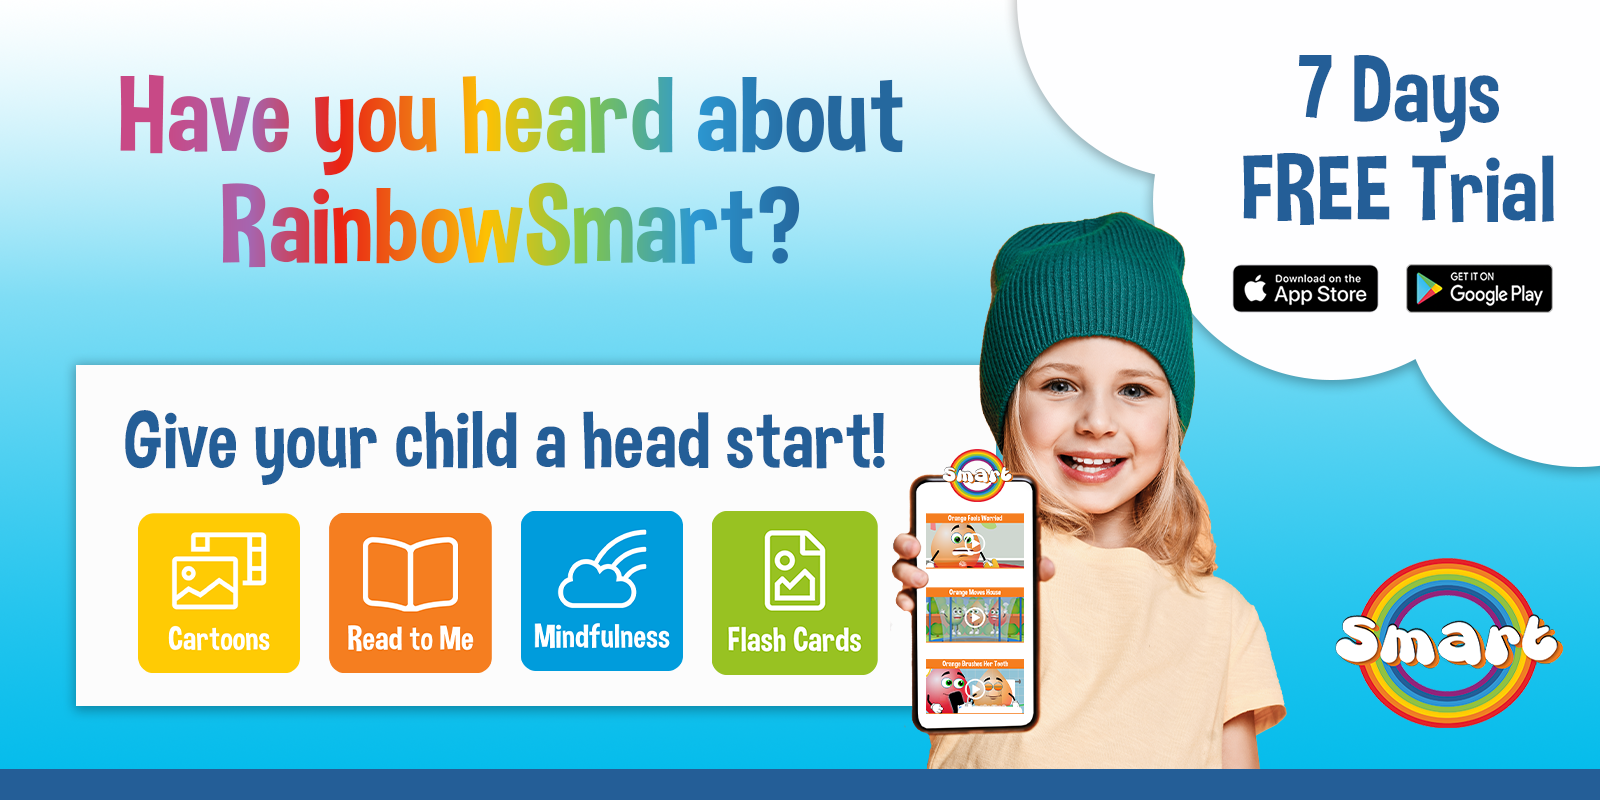 Xmas Giveaways – Win a £100 Smyths Toys Gift Card with the RainbowSmart App